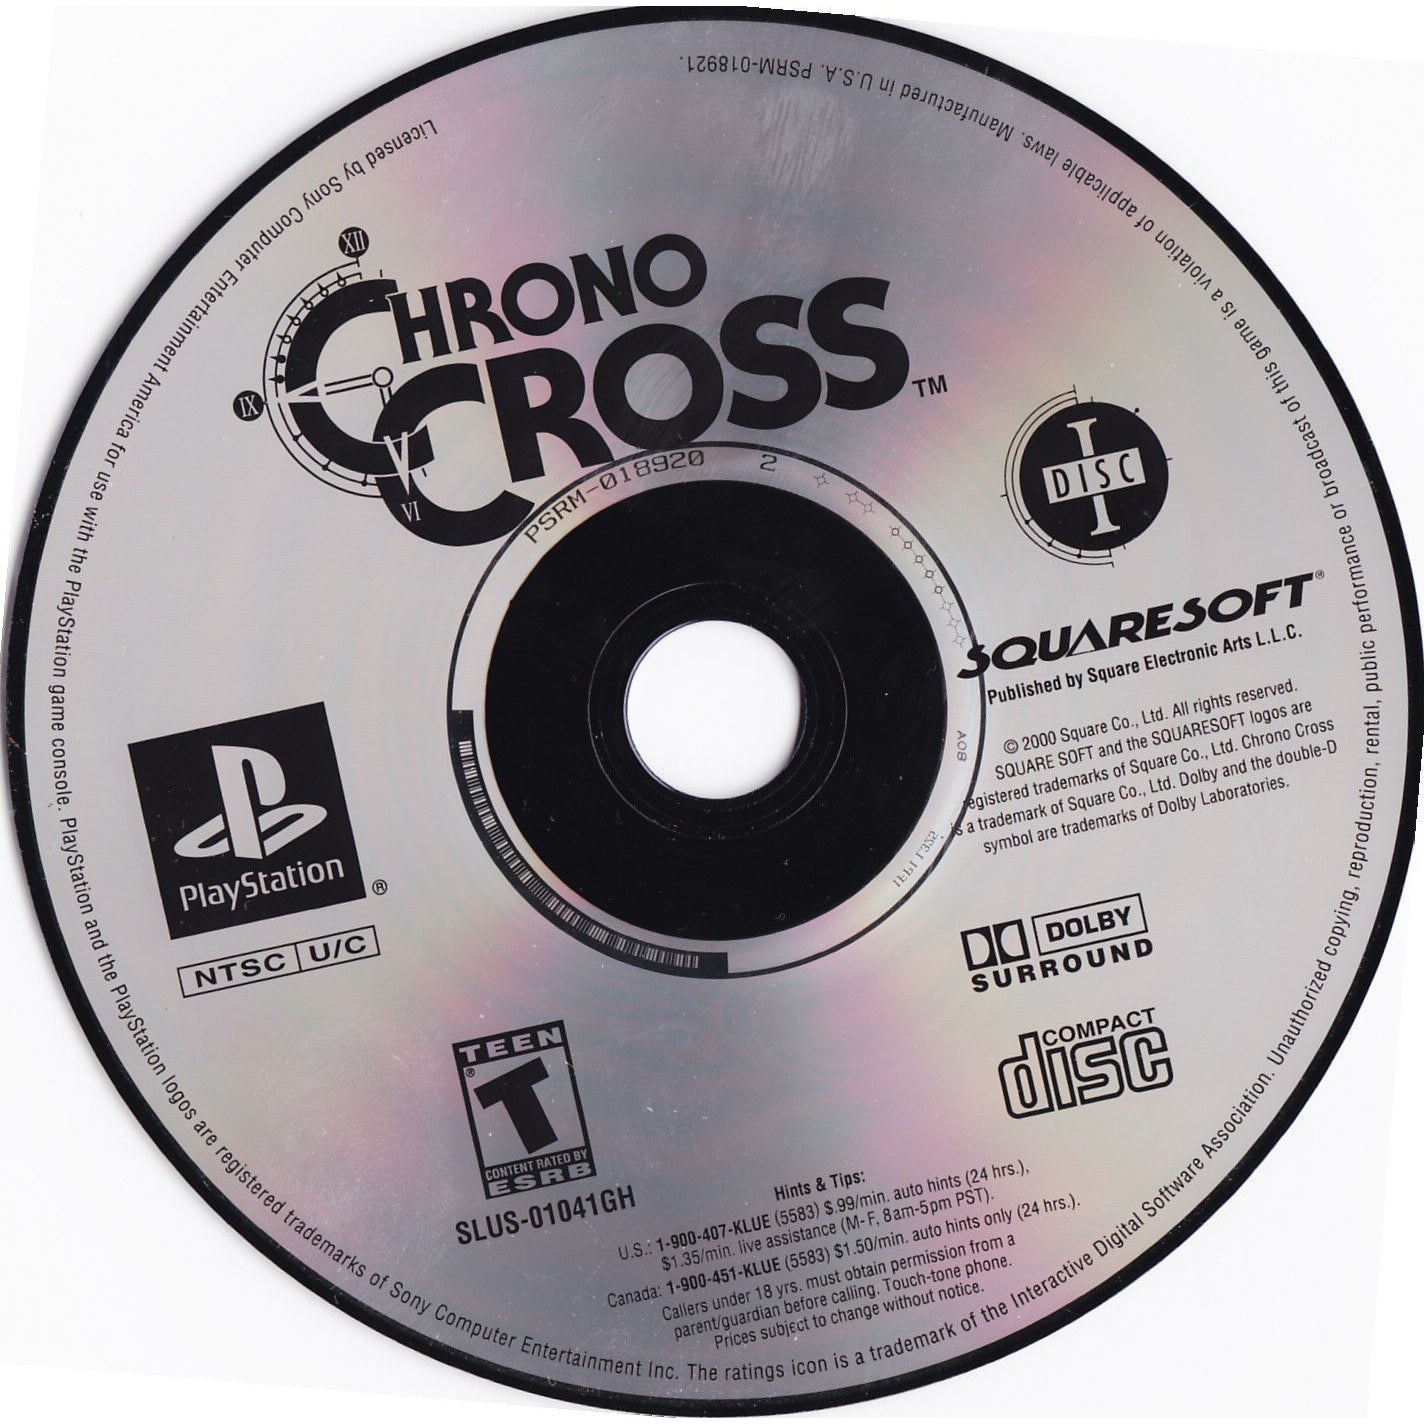 Chrono Cross (Greatest Hits) - PlayStation 1 (PS1) Game Complete - YourGamingShop.com - Buy, Sell, Trade Video Games Online. 120 Day Warranty. Satisfaction Guaranteed.